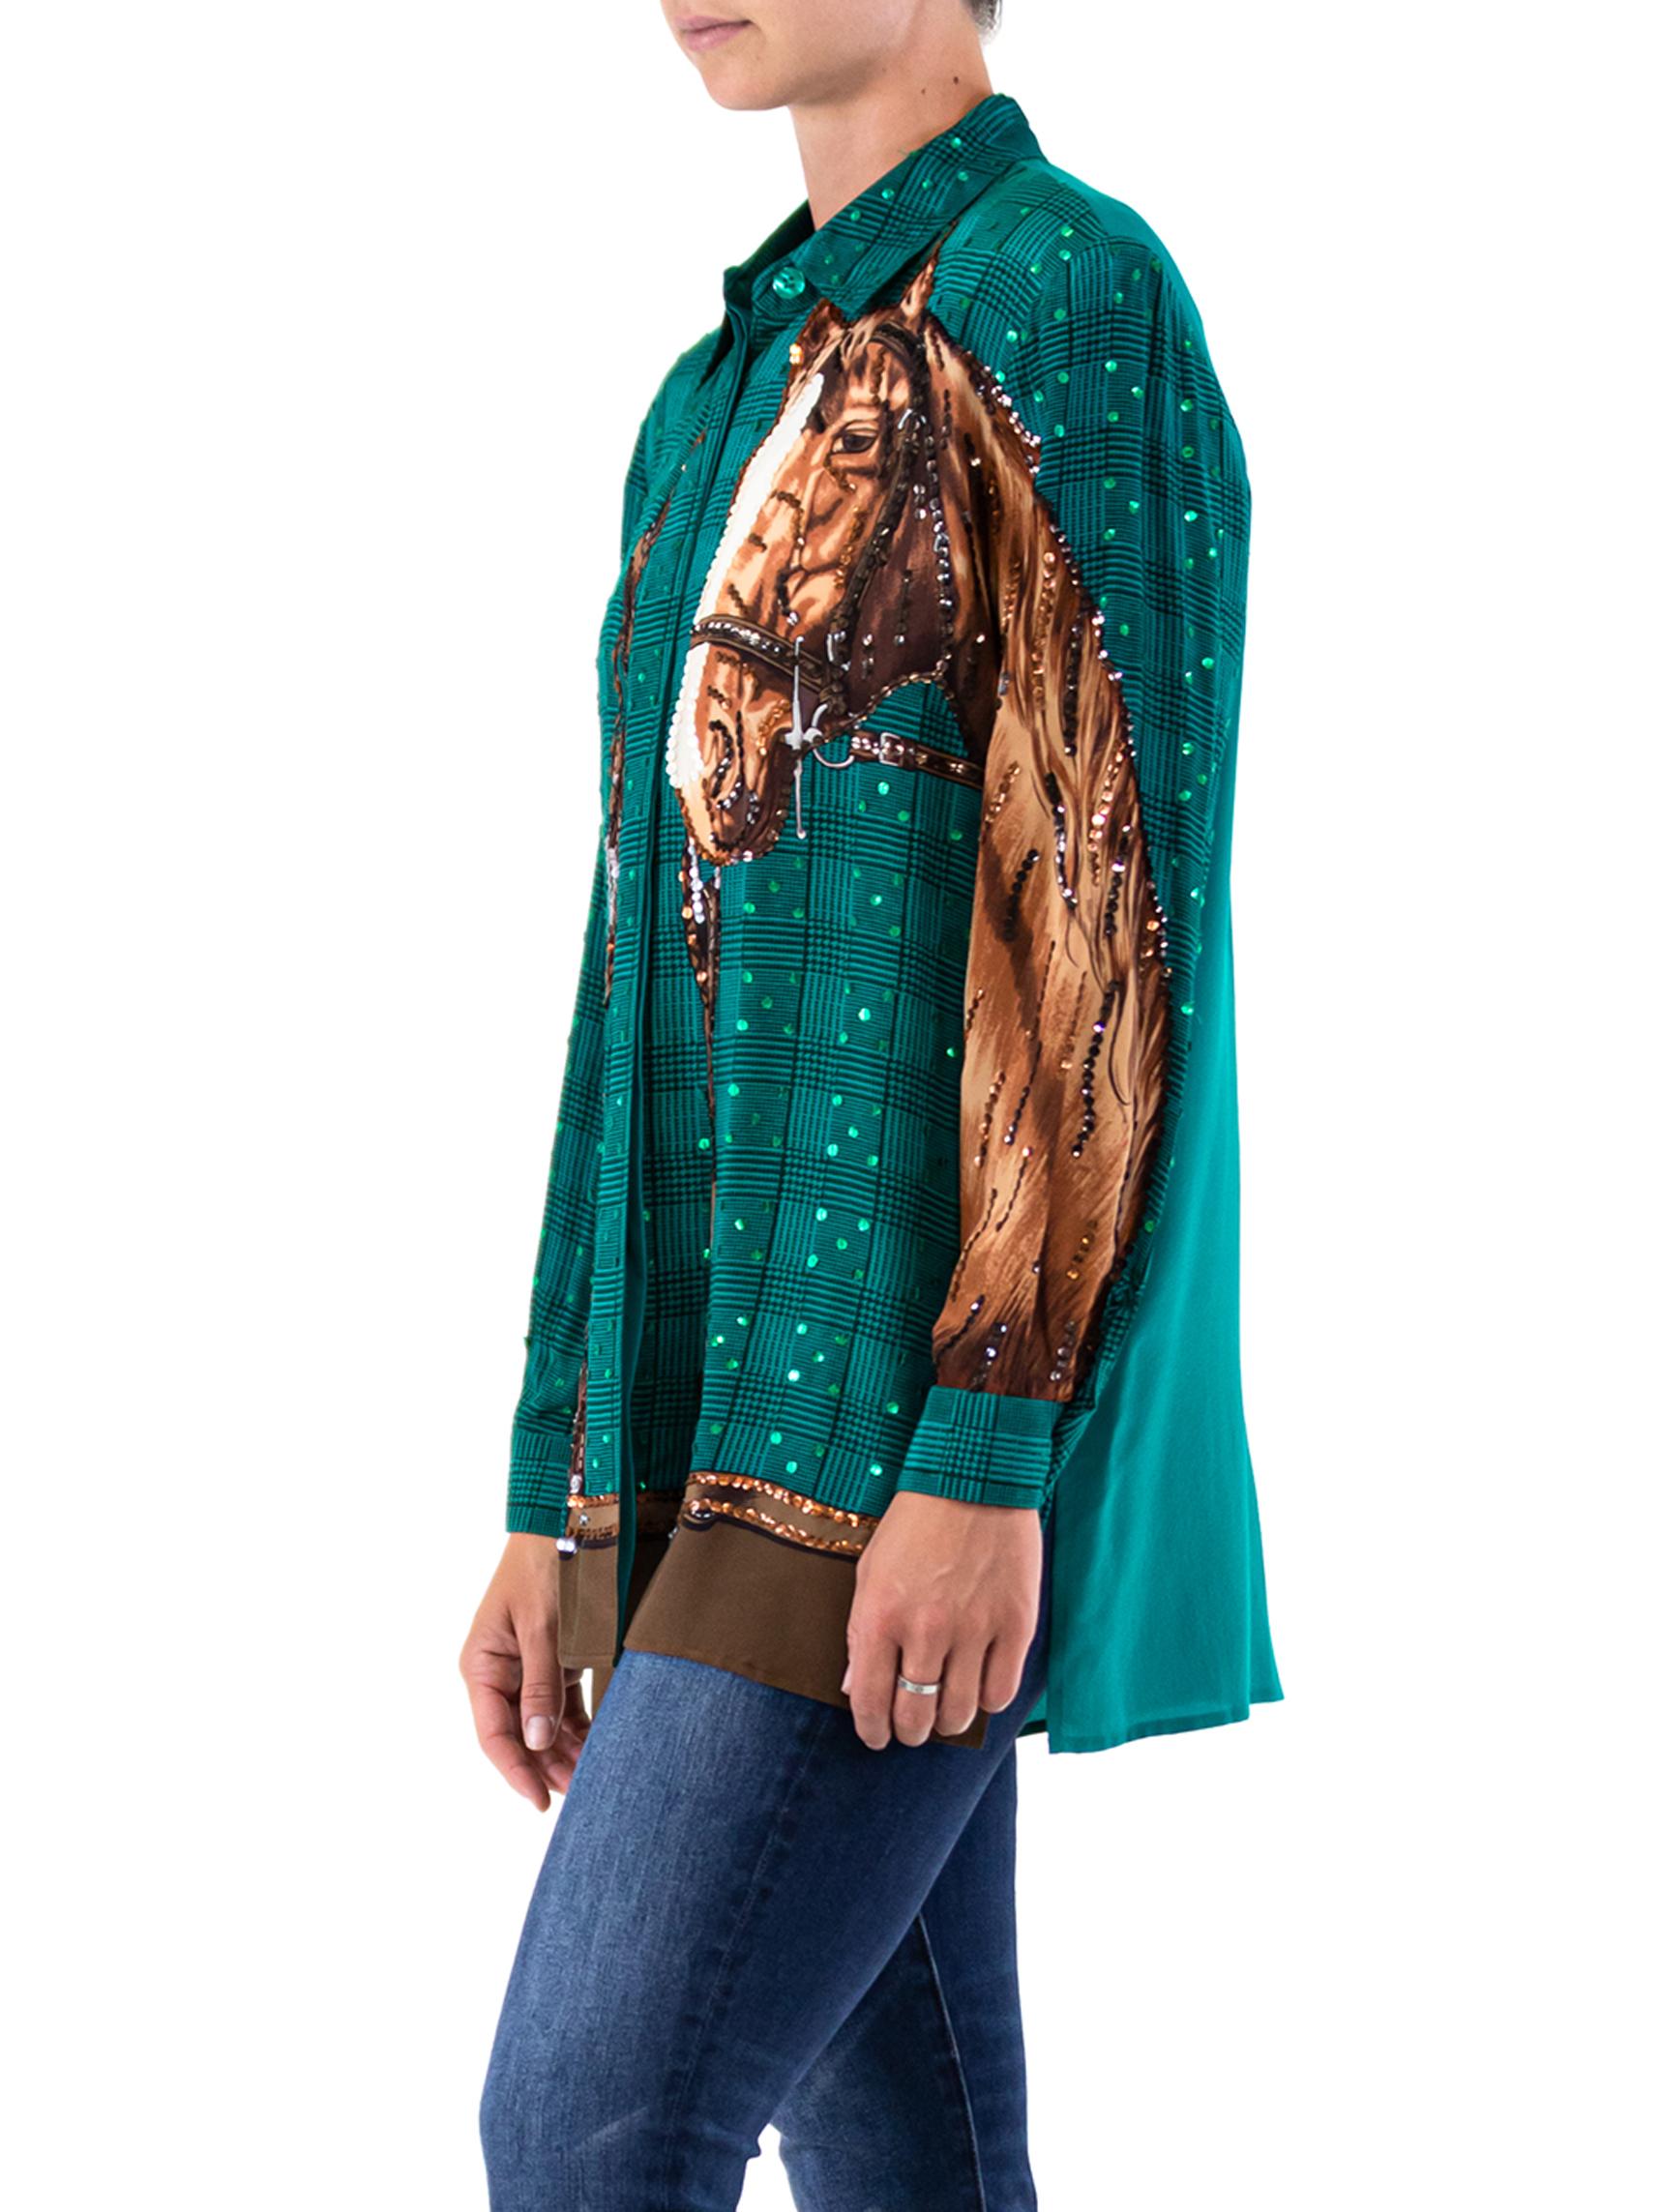 Women's 1980'S GUCCI Style Green Brown Sequined Horse Print Top For Sale